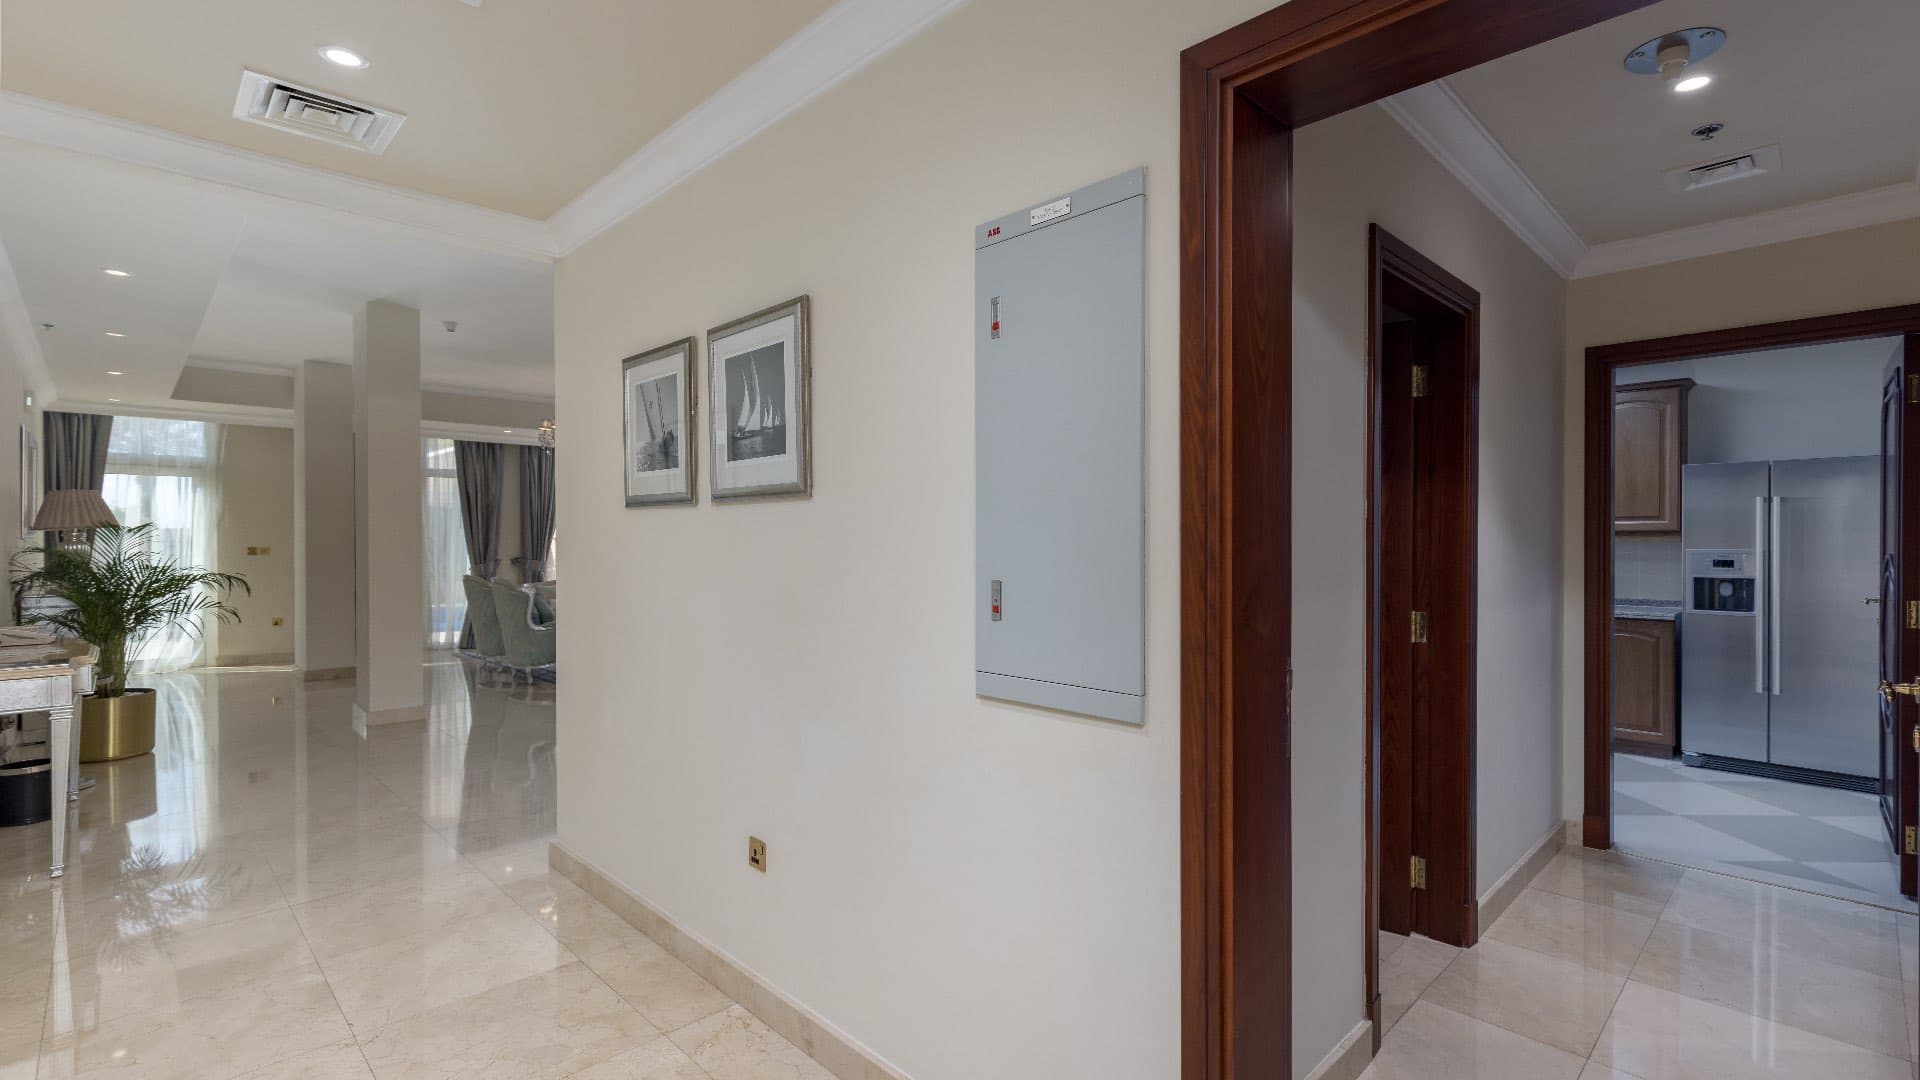 4 Bedroom Apartment For Sale The Crescent Lp10249 27075f607573b400.jpg